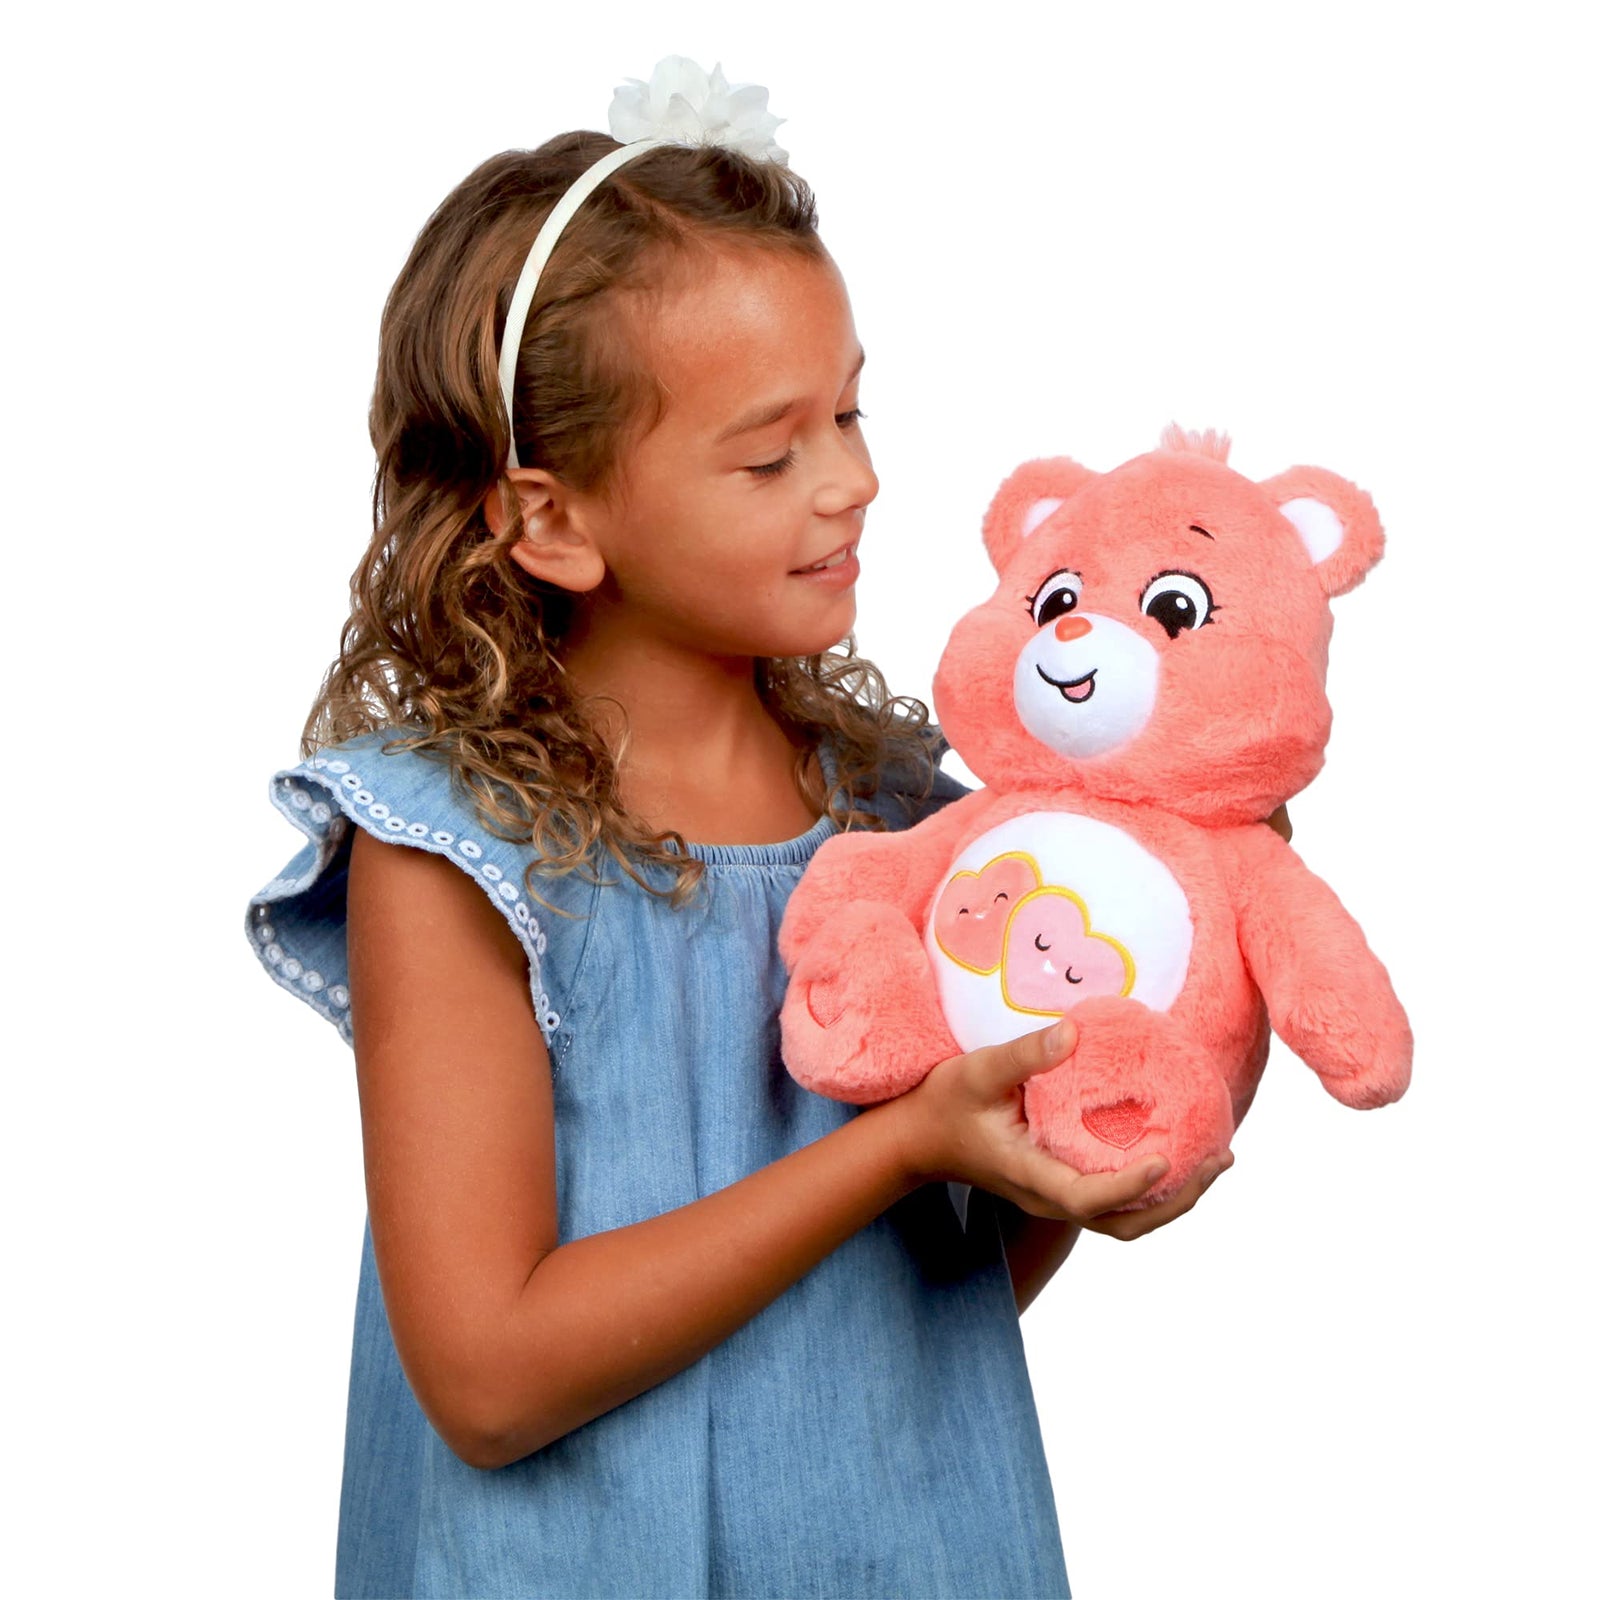 Care Bears 22084 14 Inch Medium Plush Love-A-Lot Bear, Collectable Cute Plush Toy, Cuddly Toys for Children, Soft Toys for Girls and Boys, Cute Teddies Suitable for Girls and Boys Aged 4 Years +